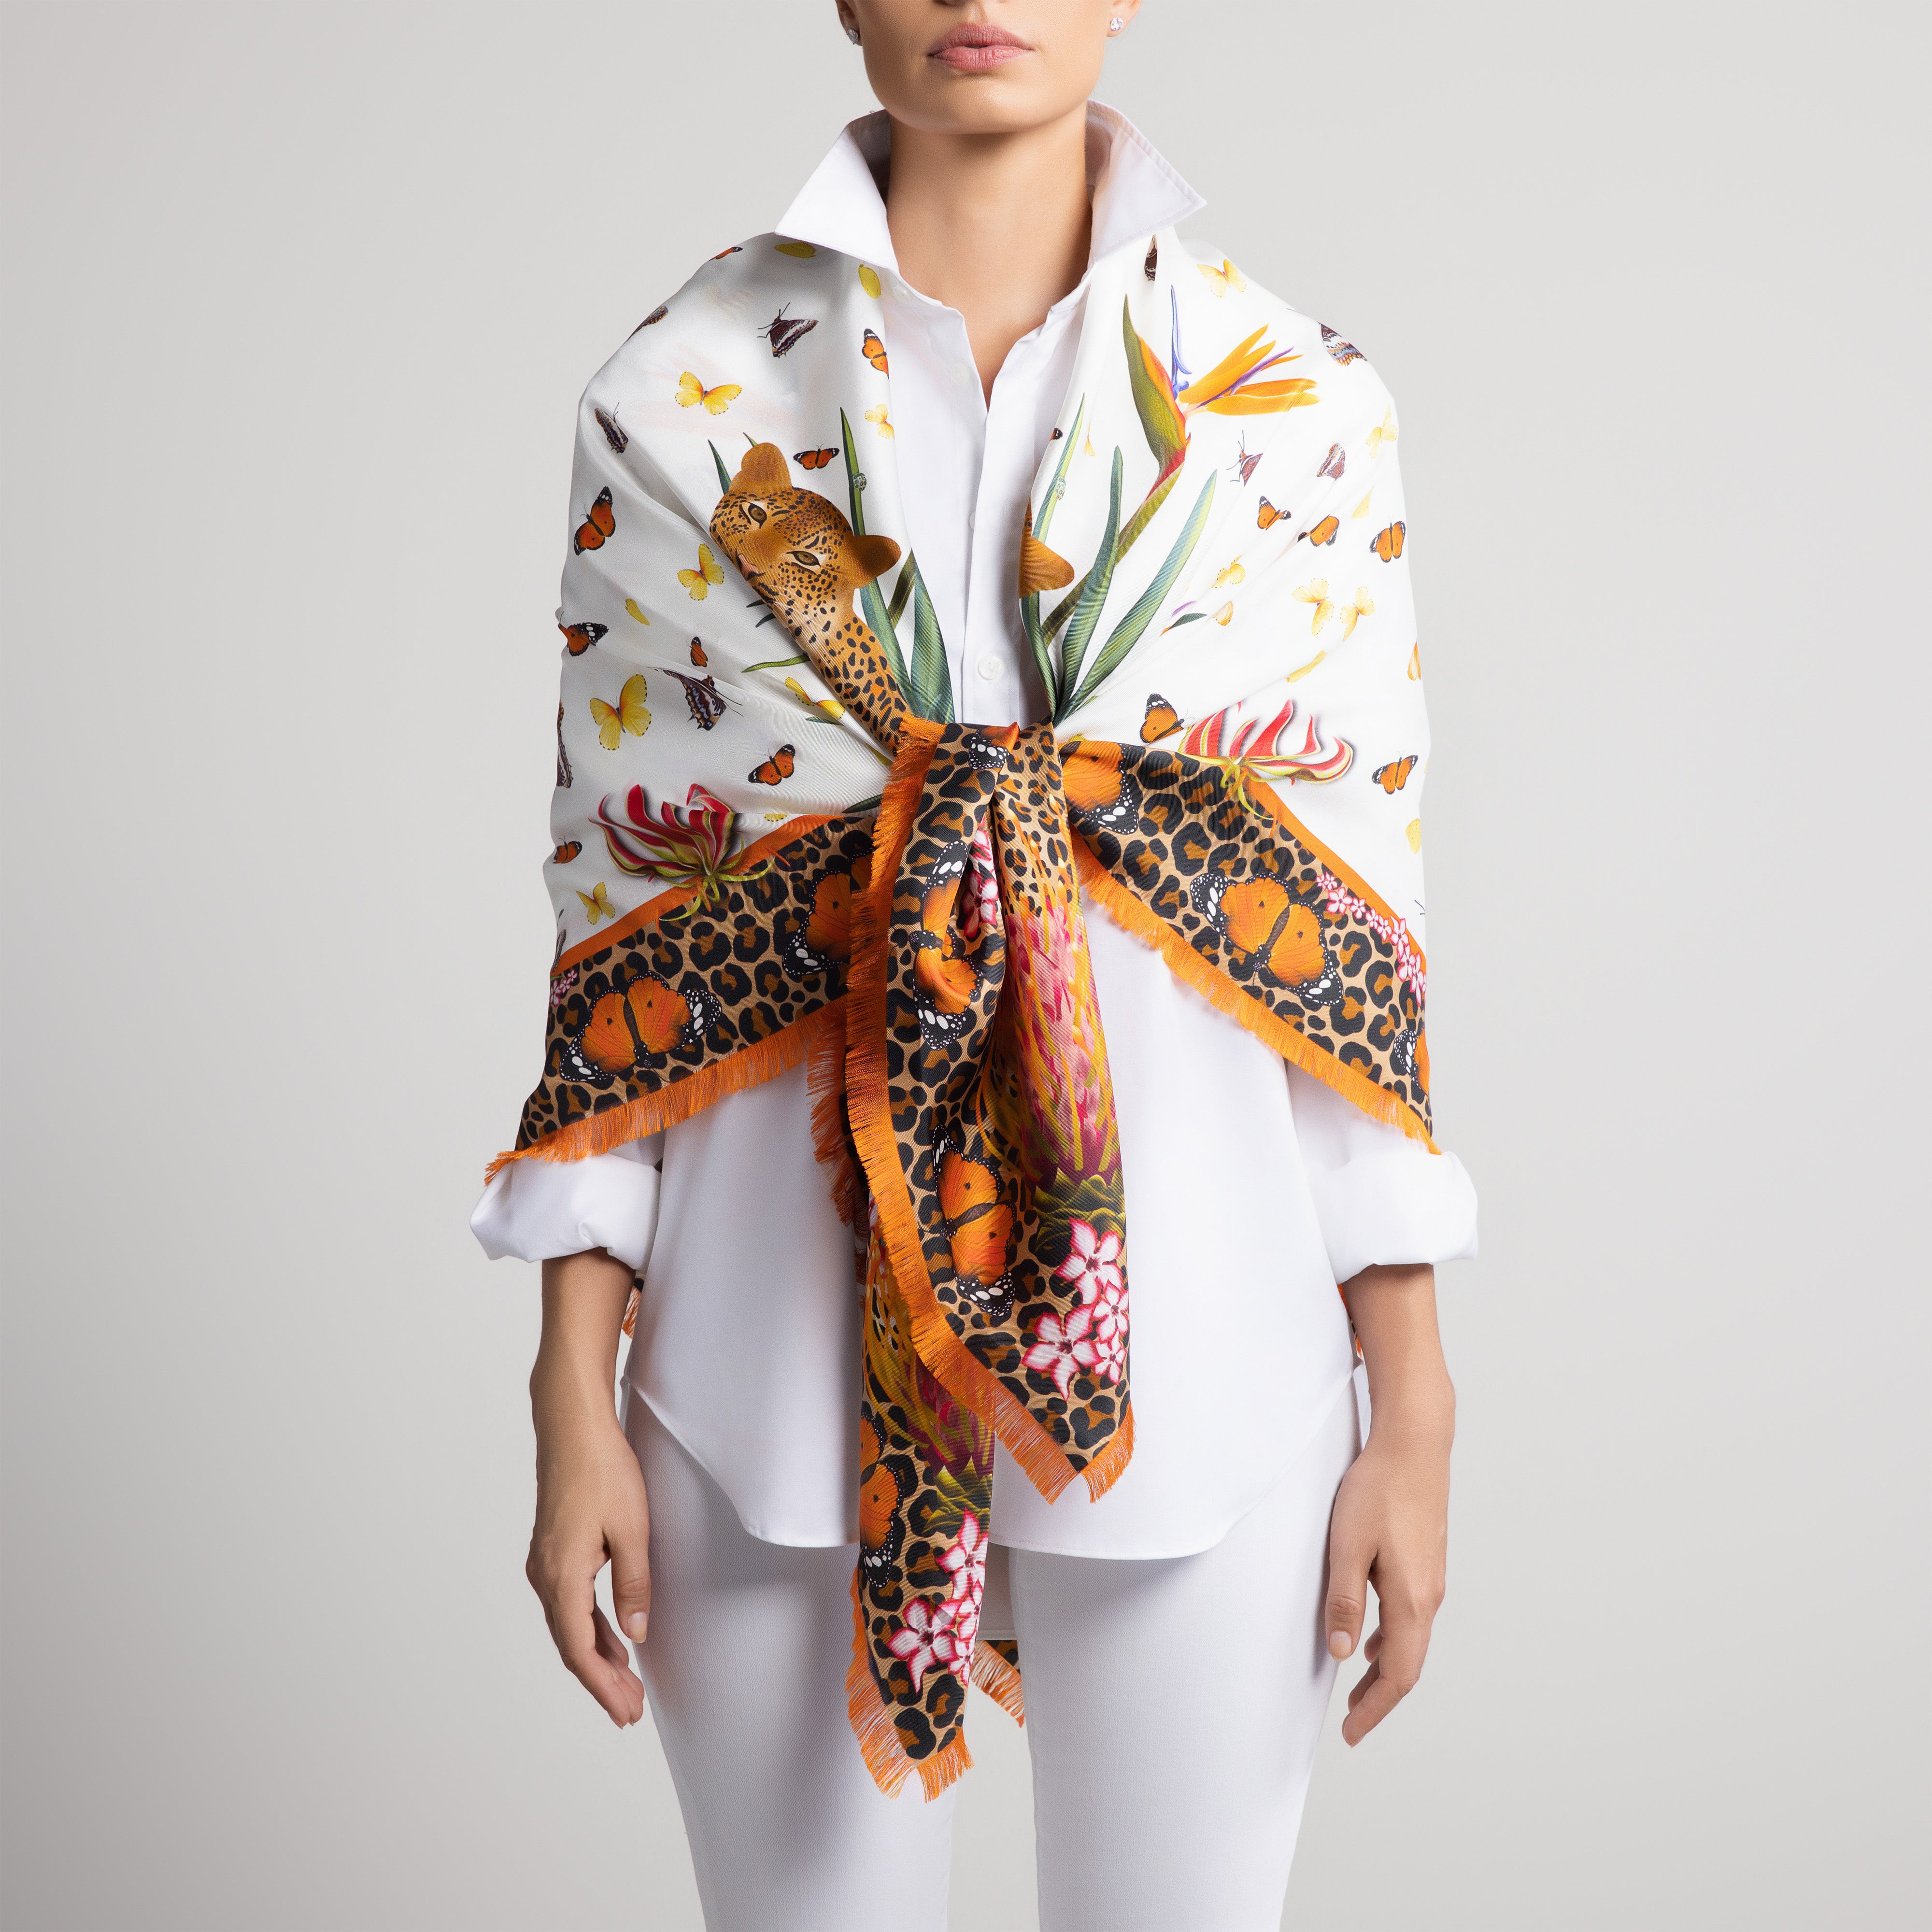 Leopard & Butterfly Grande Silk Scarf in White with Hand-Feathered Edges